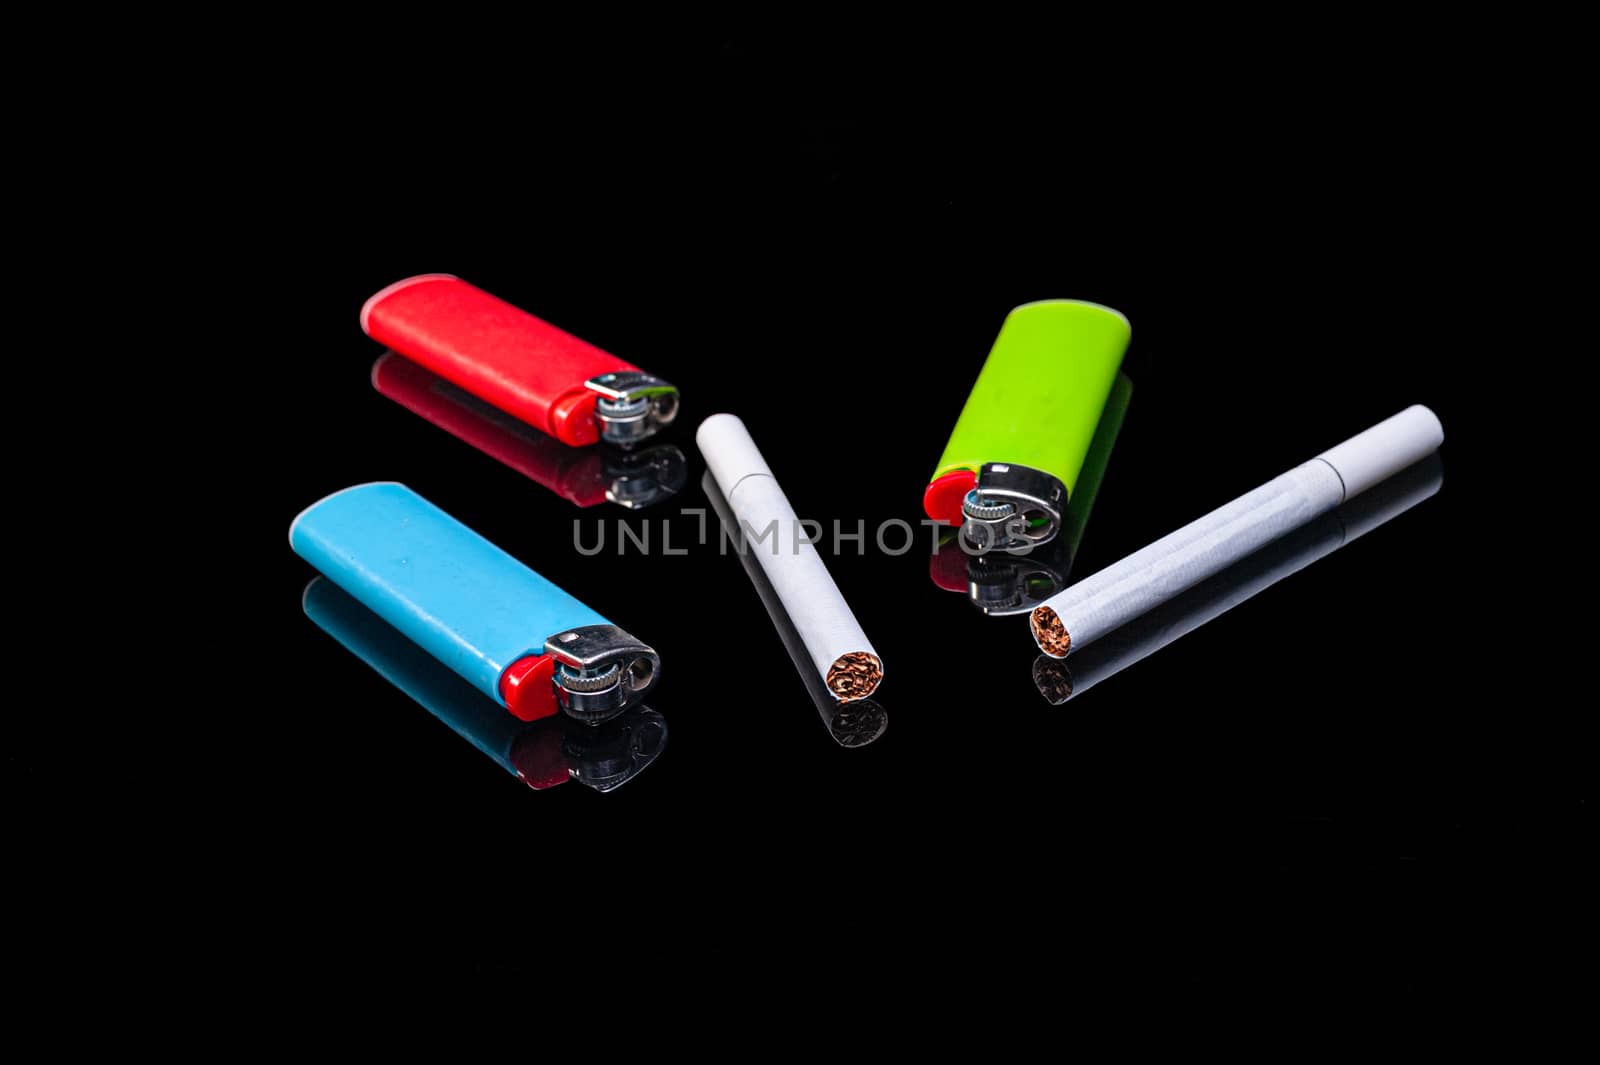 white filter cigarettes and plastic gas lighters of different colors on an isolated black background with reflection by chernobrovin